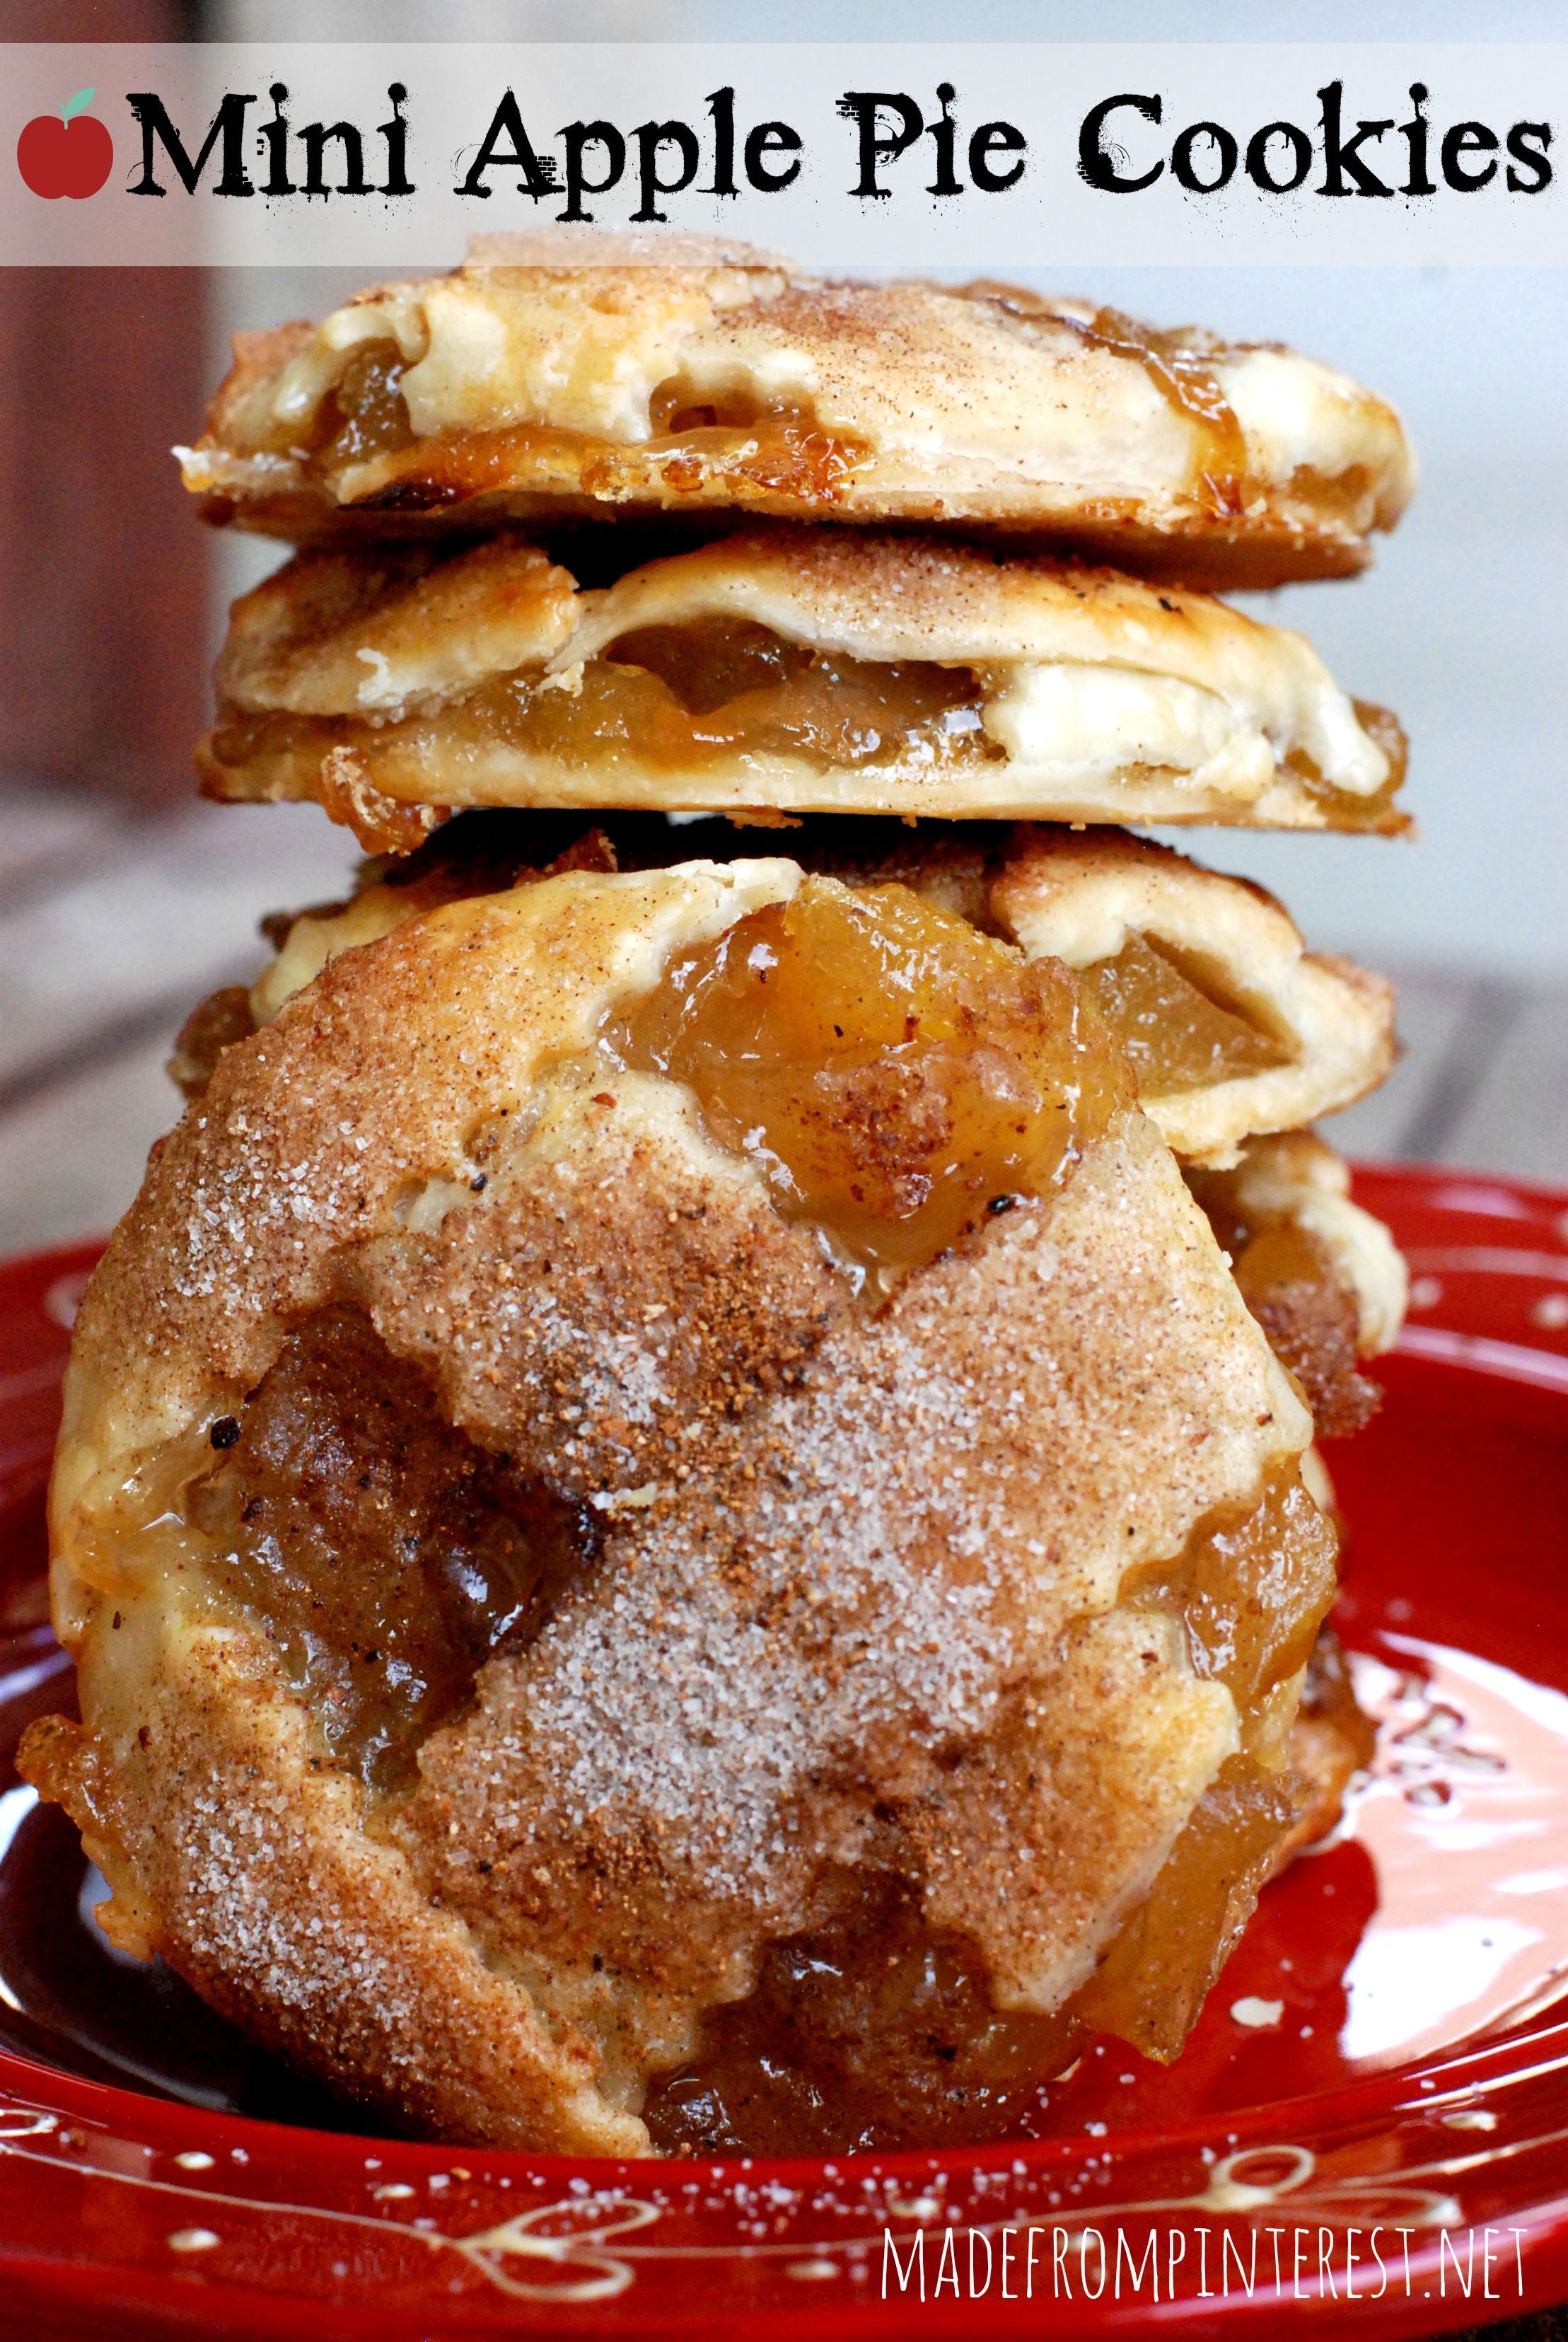 Mini Apple Pie Cookies. Get outta here, these look delish! Apple pie is totally